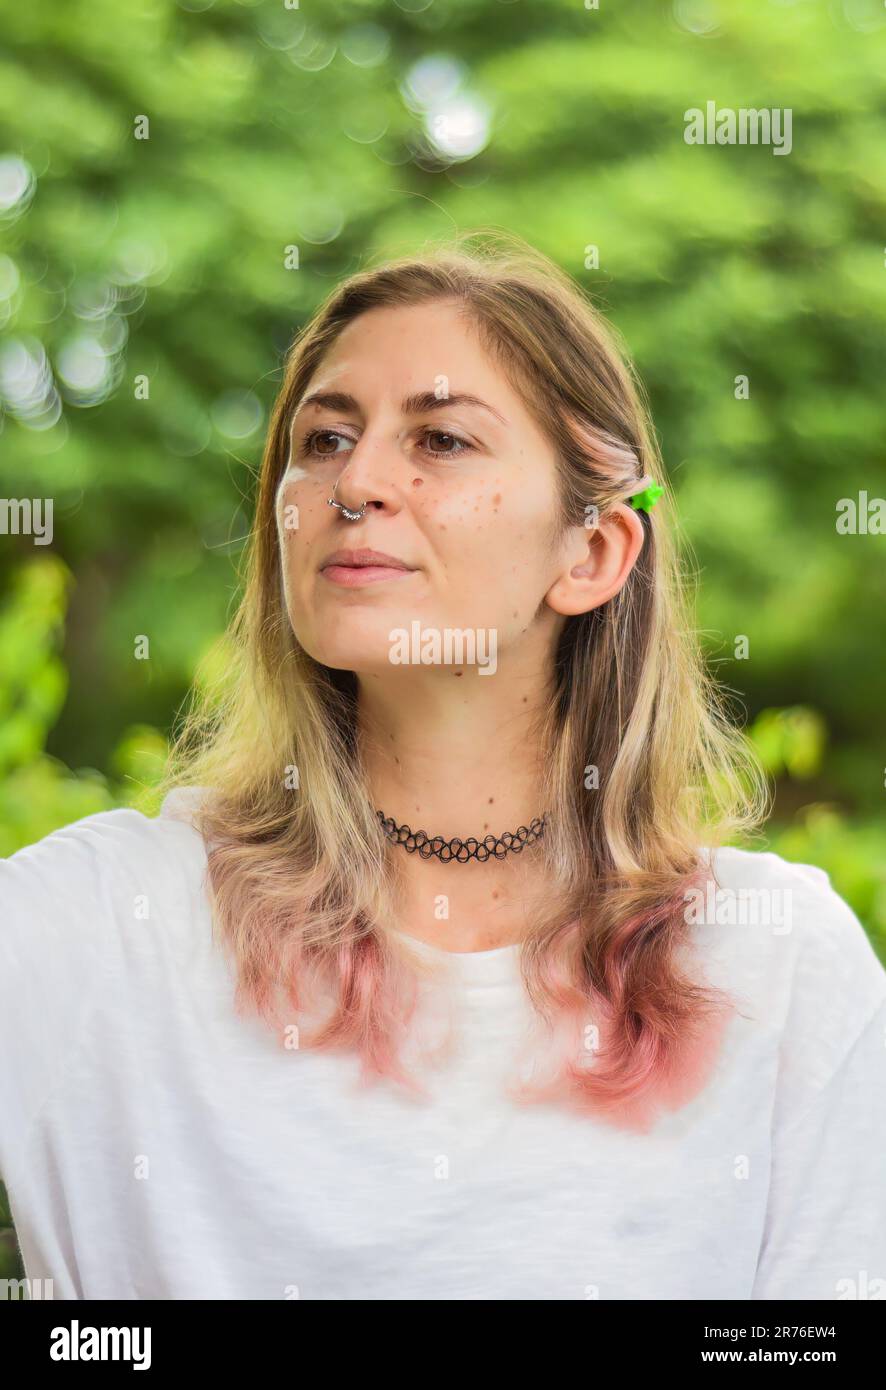 Portrait of beautiful woman with pink hair looking sideways Stock Photo